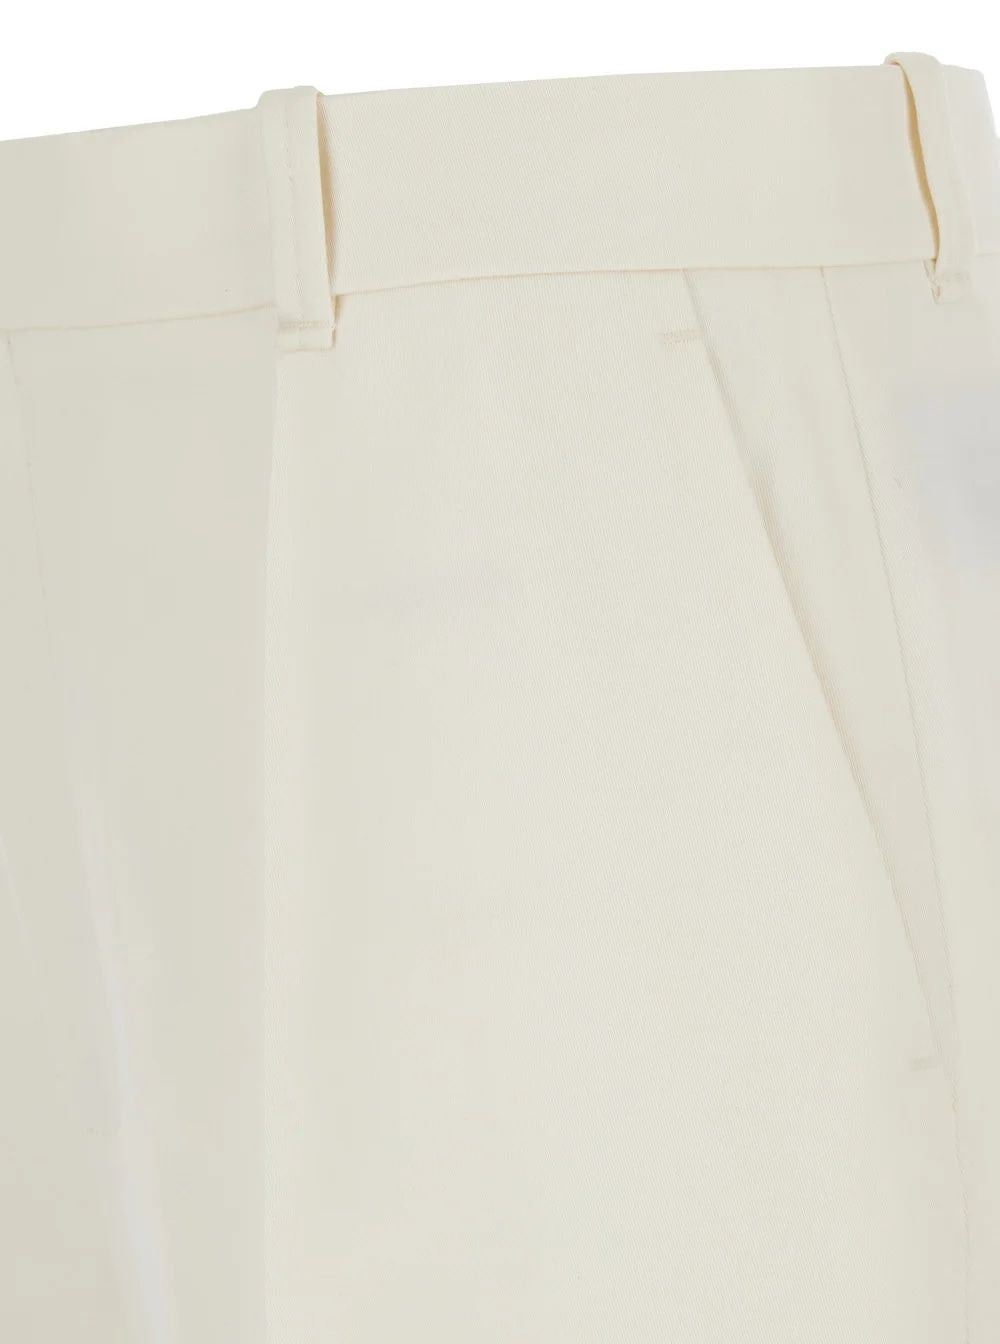 CHLOÉ STRAIGHT NATURAL TROUSERS